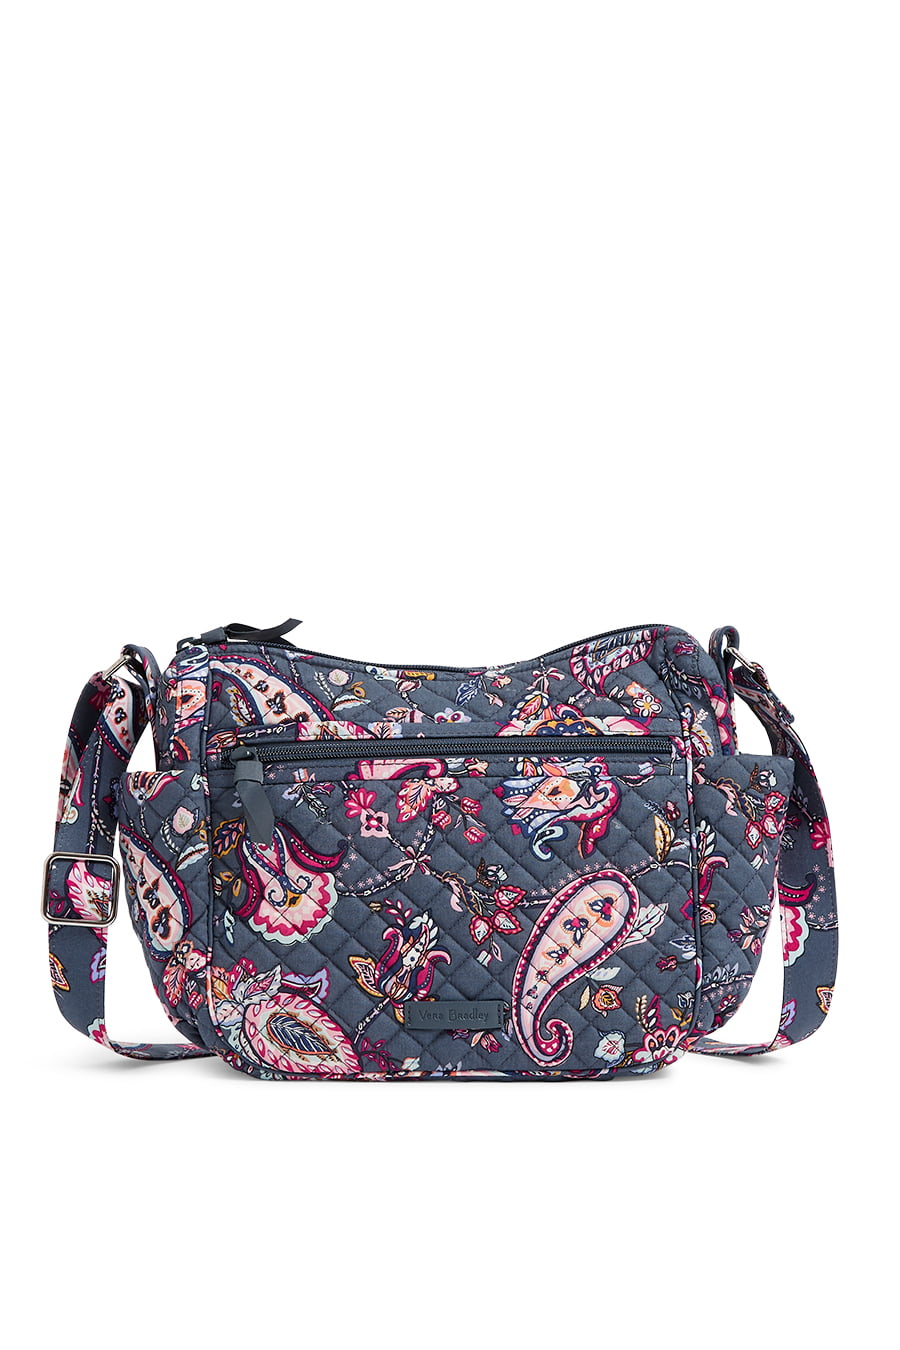 Vera Bradley Cotton Little Hipster Crossbody Purse with RFID Protection  SKU: 9735938 - YouTube